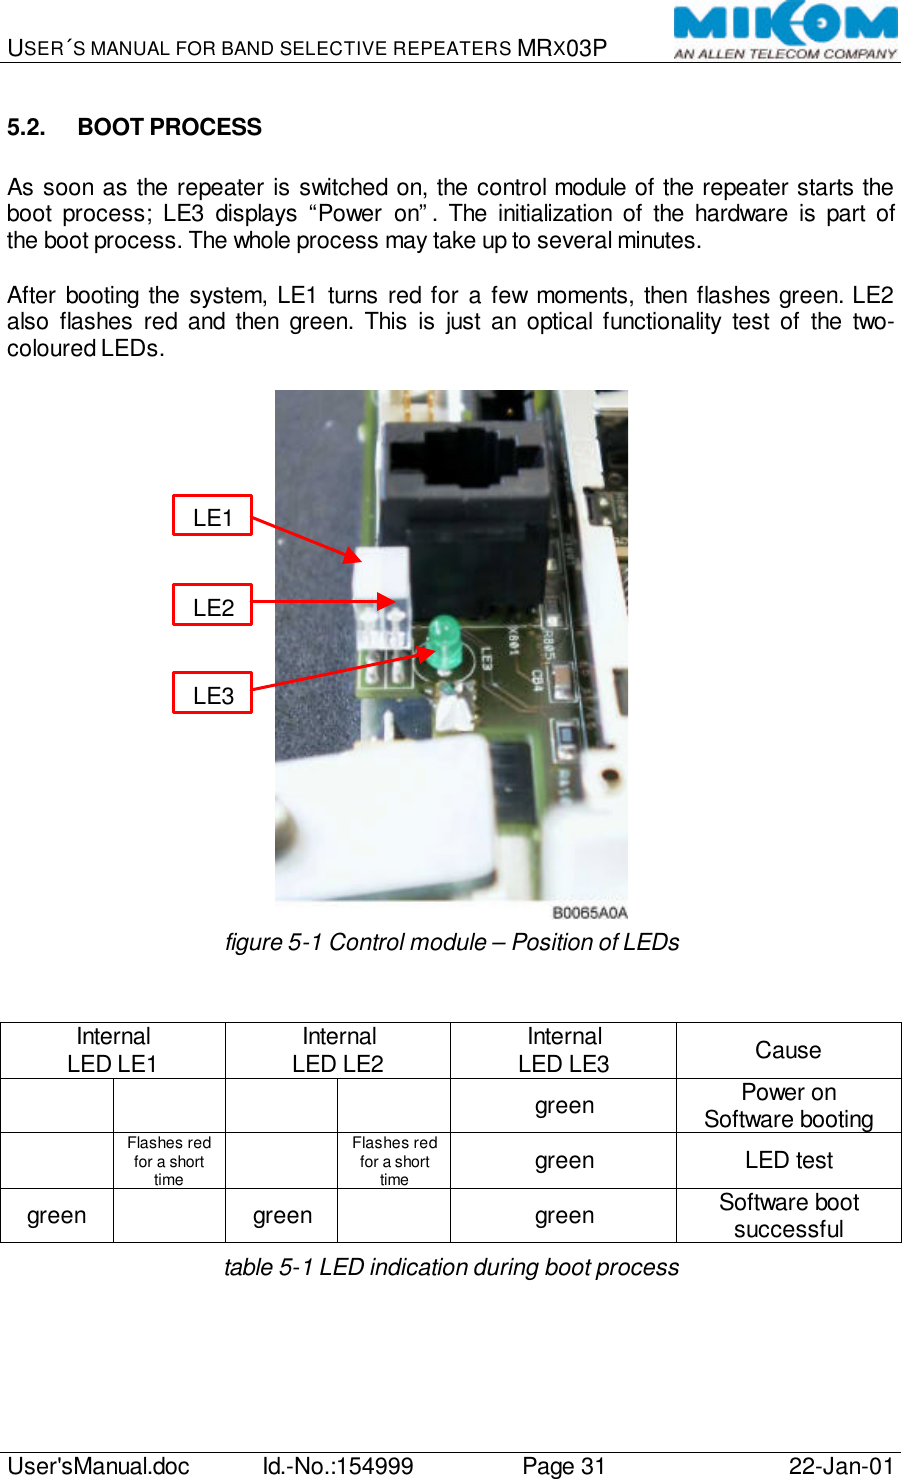 USER´S MANUAL FOR BAND SELECTIVE REPEATERS MRX03P   User&apos;sManual.doc Id.-No.:154999 Page 31 22-Jan-01  5.2. BOOT PROCESS  As soon as the repeater is switched on, the control module of the repeater starts the boot process; LE3 displays “Power on”. The initialization of the hardware is part of the boot process. The whole process may take up to several minutes.  After booting the system, LE1 turns red for a few moments, then flashes green. LE2 also flashes red and then green. This is just an optical functionality test of the two-coloured LEDs.   figure 5-1 Control module – Position of LEDs   Internal LED LE1 Internal LED LE2 Internal LED LE3 Cause      green Power on Software booting  Flashes red for a short time  Flashes red for a short time green LED test green    green    green Software boot successful table 5-1 LED indication during boot process  LE3 LE2 LE1 